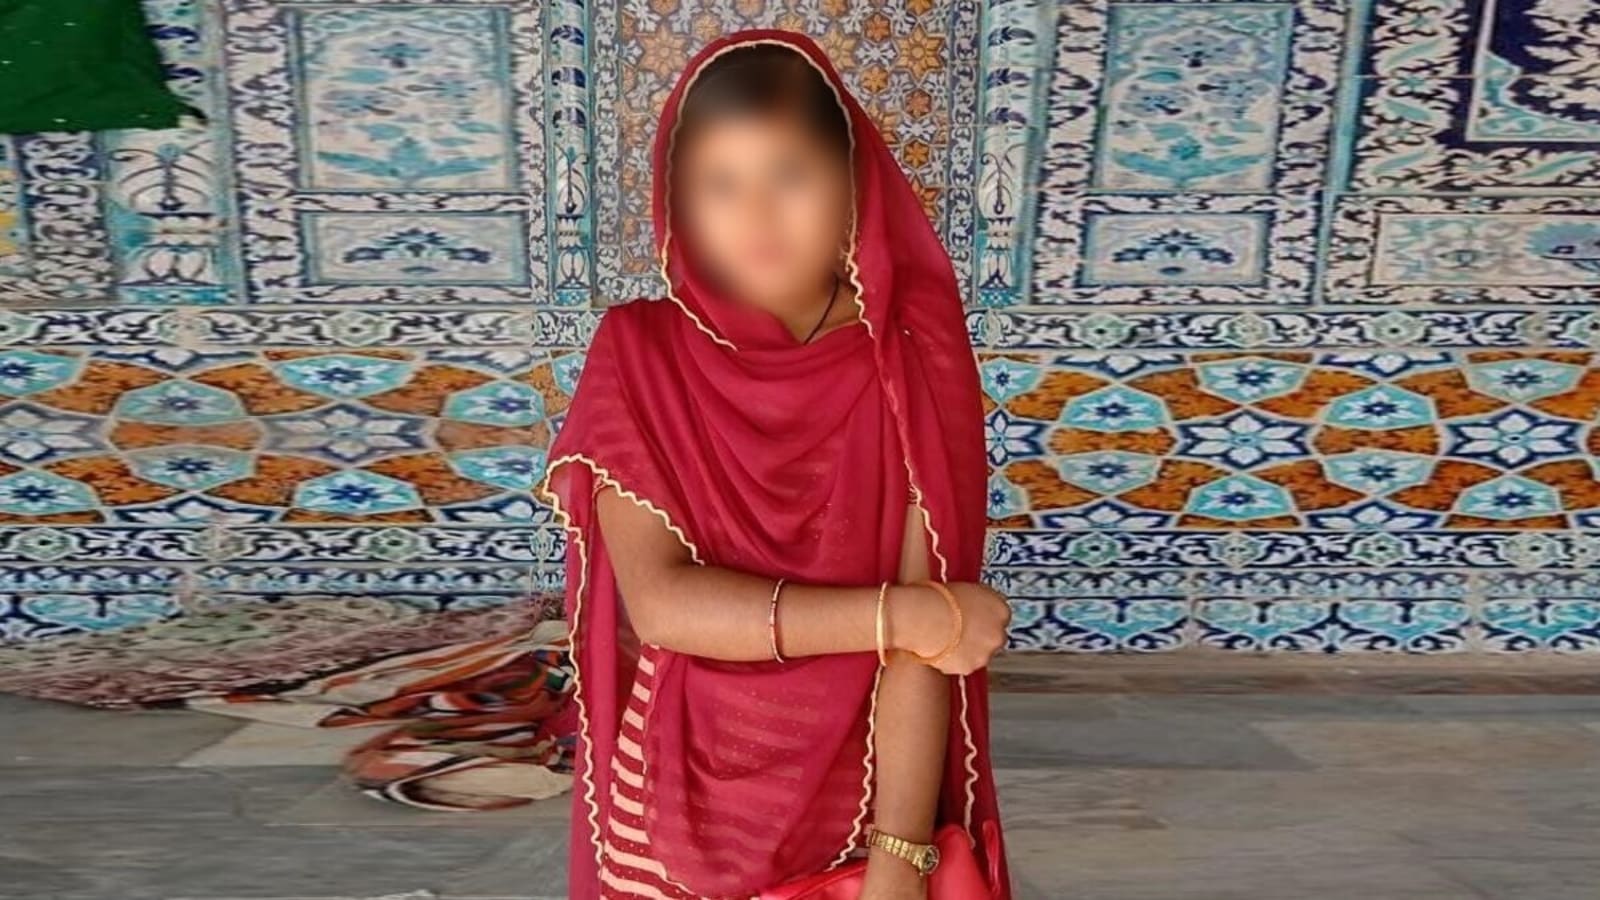 Pakistan Girl Kidnap Xxx - Hindu girl abducted in Pakistan's Sindh, fourth incident in 15 days | World  News - Hindustan Times